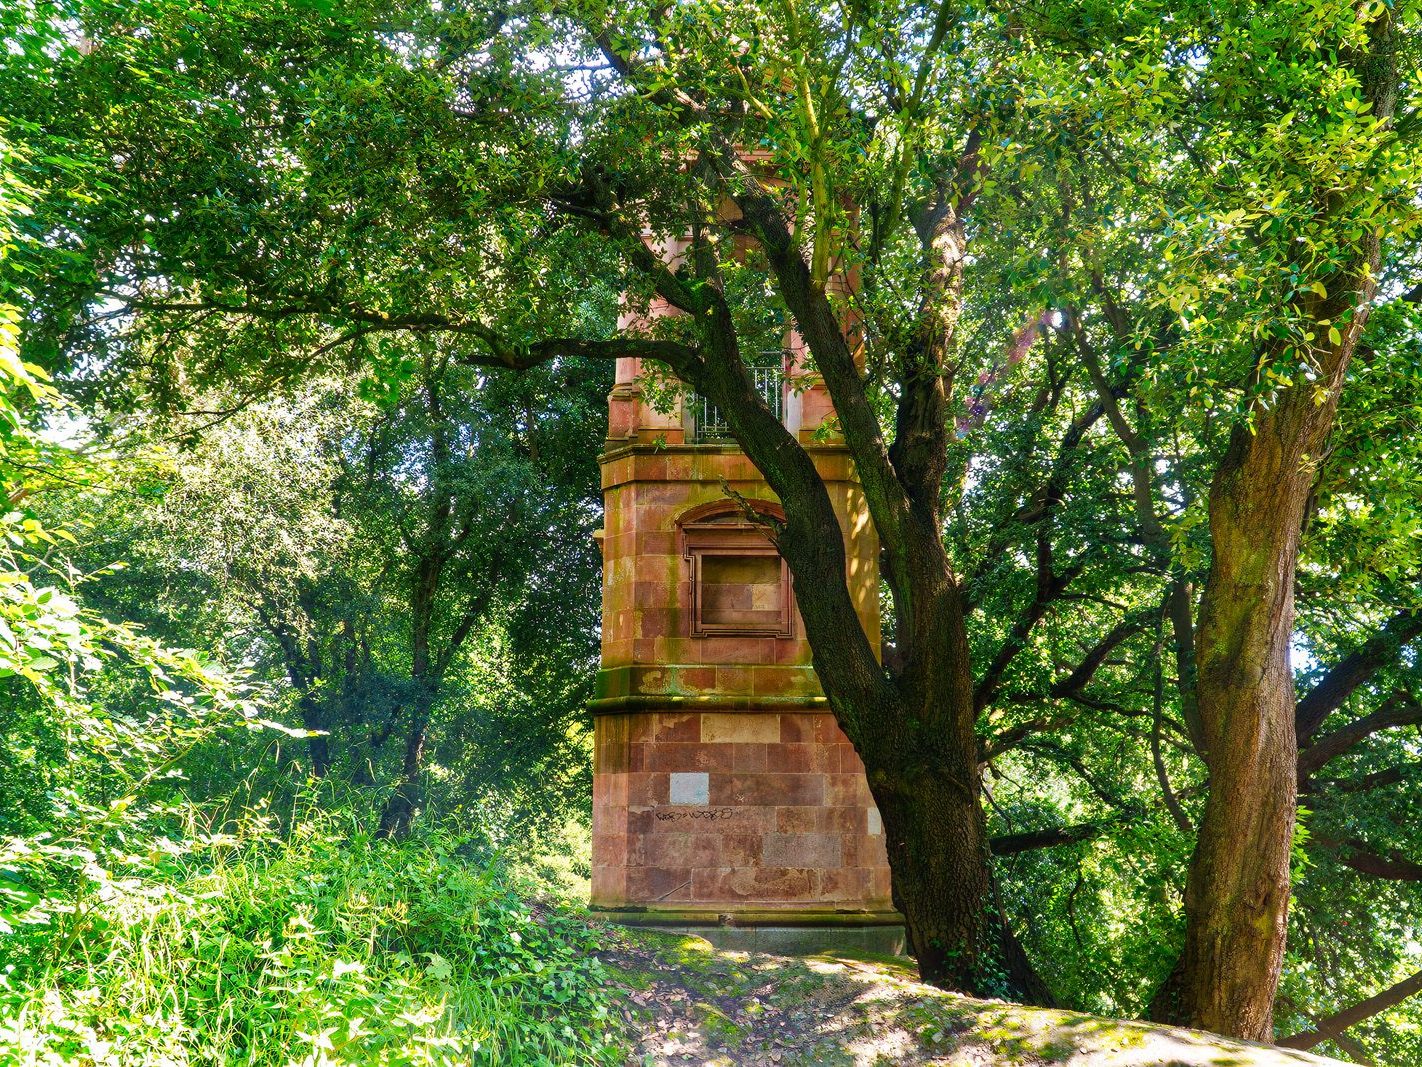 ROMAN TOWER ONE OF MANY FOLLIES AT ST ANNE'S PARK [TOMB OF JULII]-224691-1